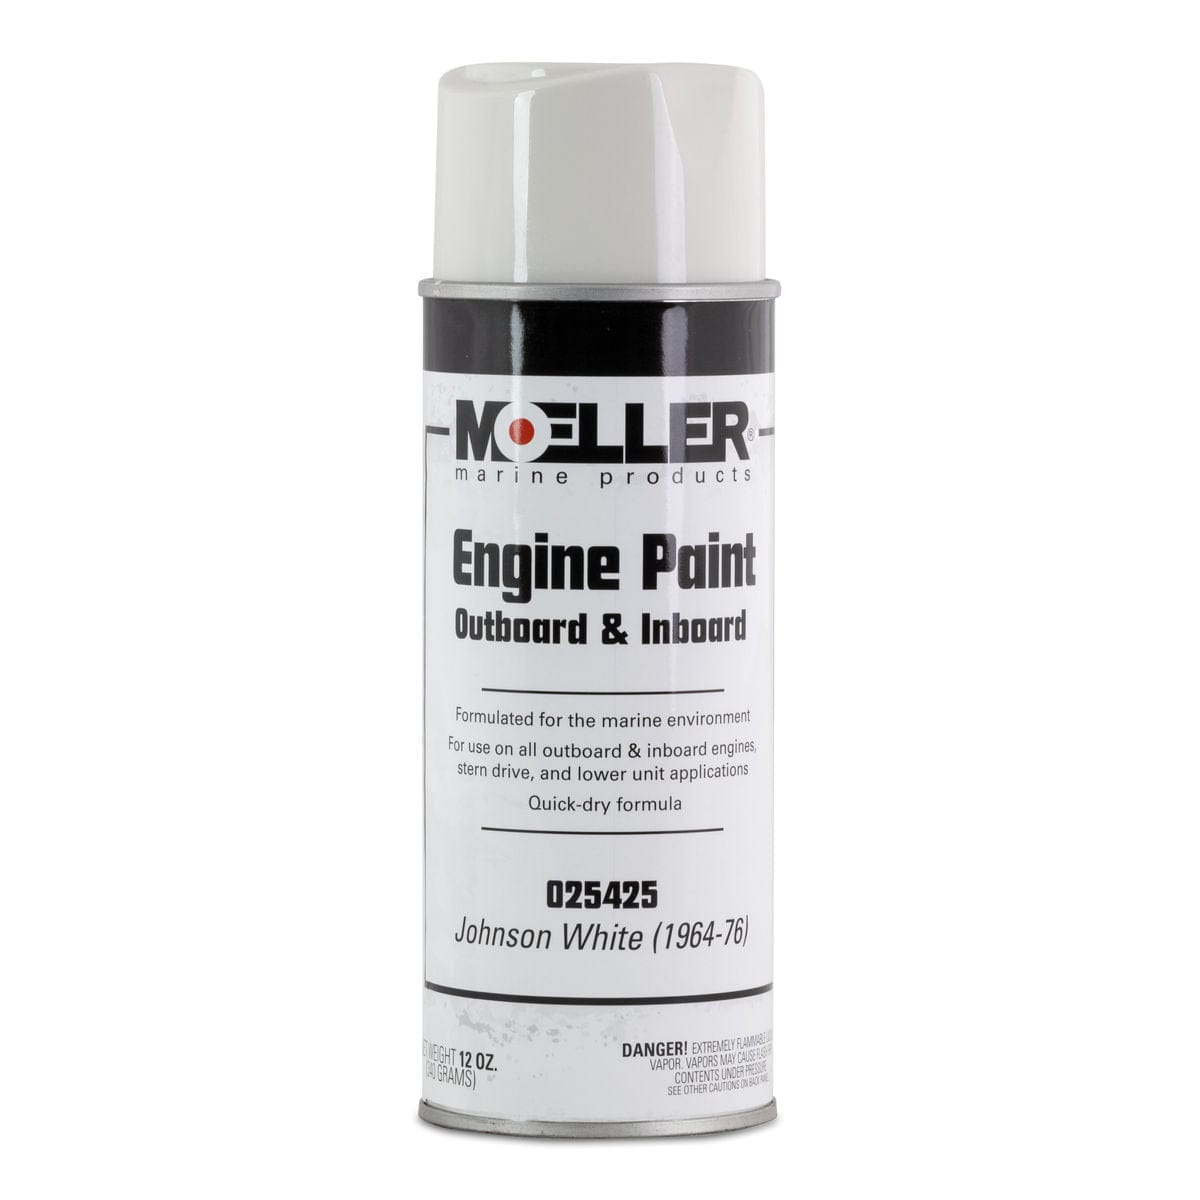 Moeller Qualifies for Free Ground Shipping Moeller Color Vision Paint 1964-1976 Johnson White #025425